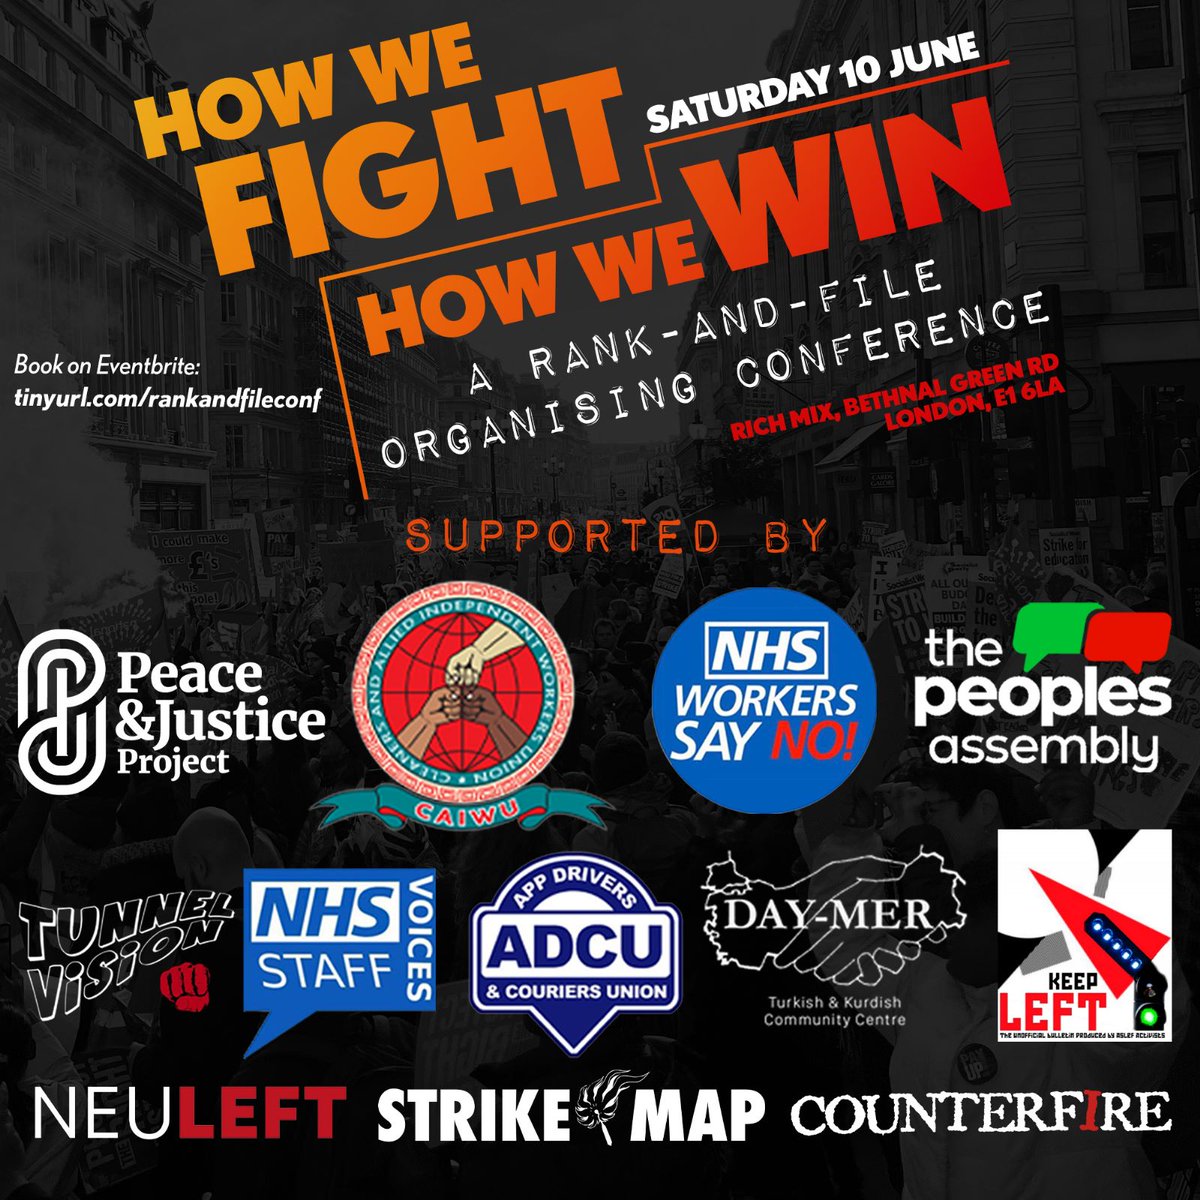 I'll be attending this powerful event on June 10th! We all need to come together to resist the sustained attack on us. Book now eventbrite.co.uk/e/how-we-fight…

#rankandfile #event #tradeunions #conference #London